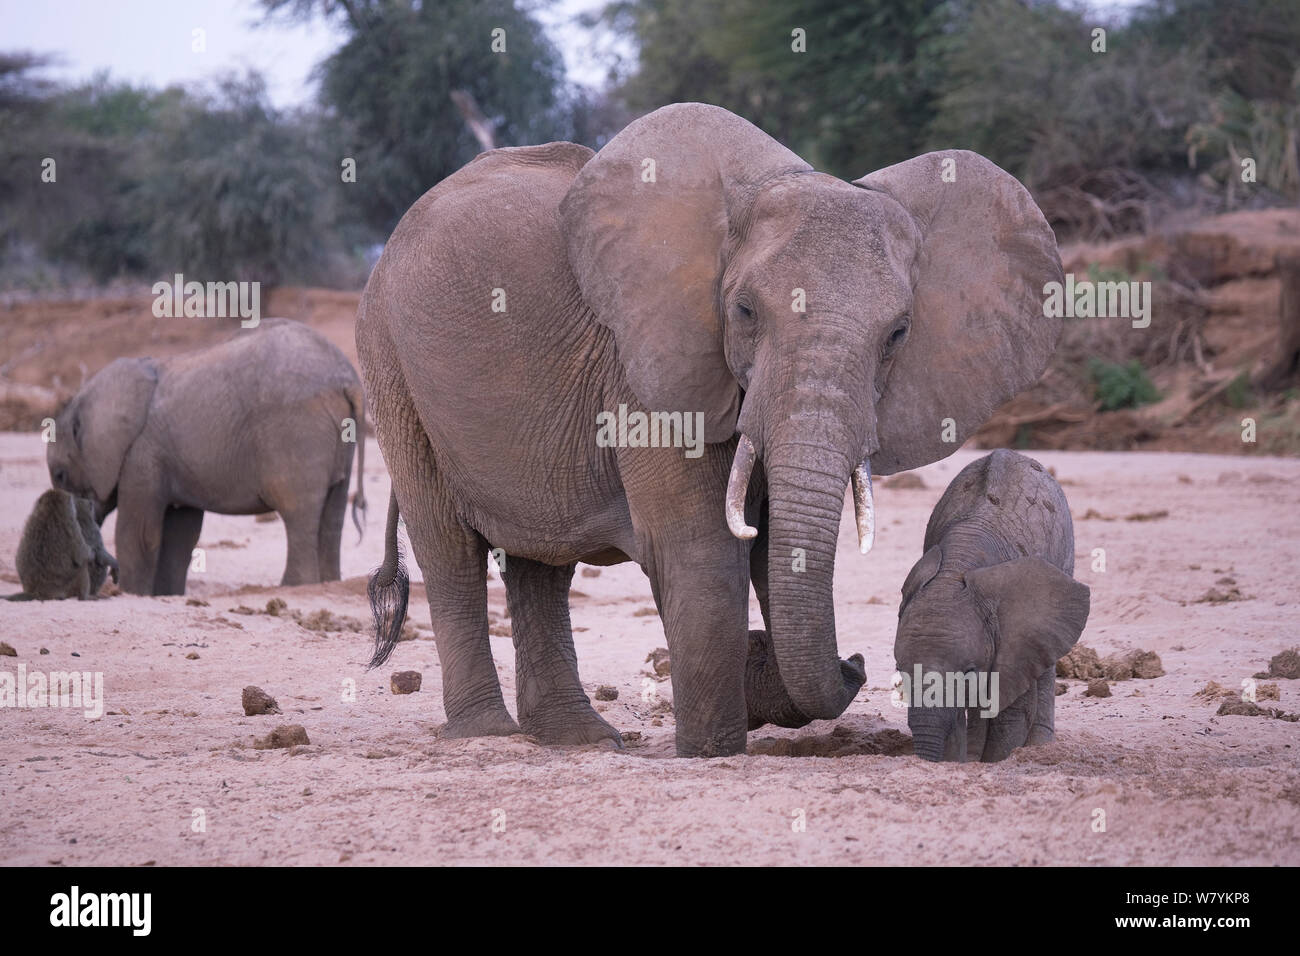 Elephants (Loxodonta africana) digging for water in the dry Ewaso Nyiro riverbed. Taken during the worst drought (2008-2009) in more than a decade, Samburu National Reserve, Kenya. Stock Photo